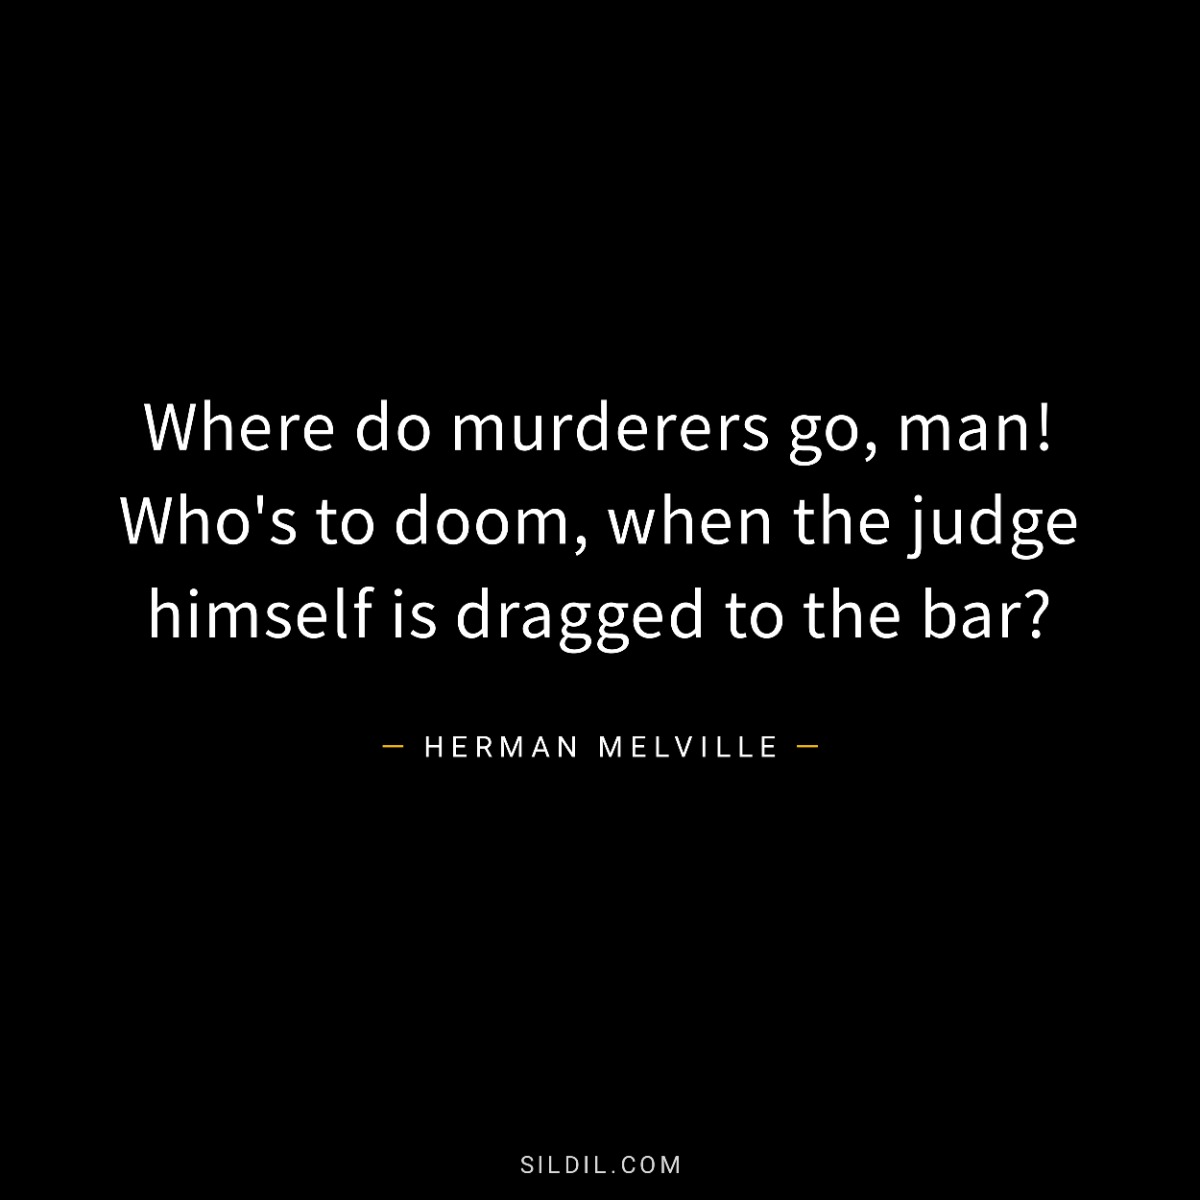 Where do murderers go, man! Who's to doom, when the judge himself is dragged to the bar?